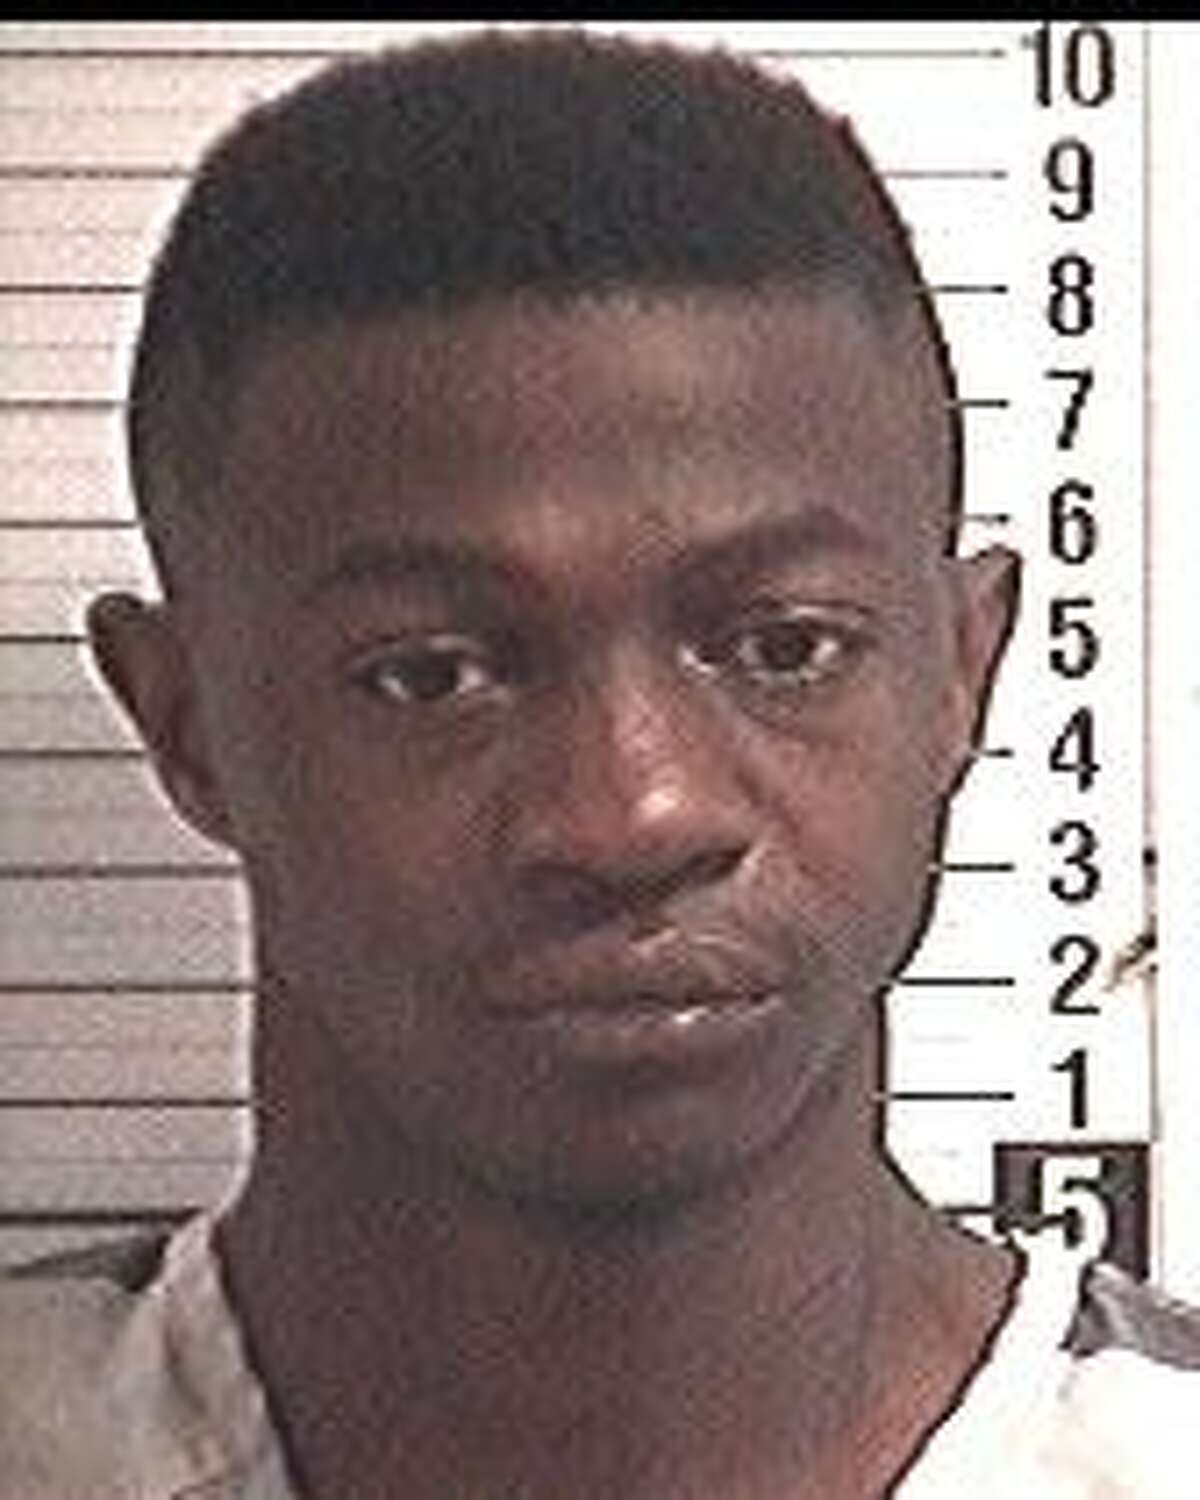 This booking photo provided by Bay County Sheriff’s Office shows David Jamichael Daniels. Seven people were injured, some critically, during an early-morning spray of gunfire Saturday, March 28, 2015 at a spring break party in Panama City Beach, Fla, police said. Daniels, 22, of Mobile, Ala., was apprehended and charged with attempted murder.